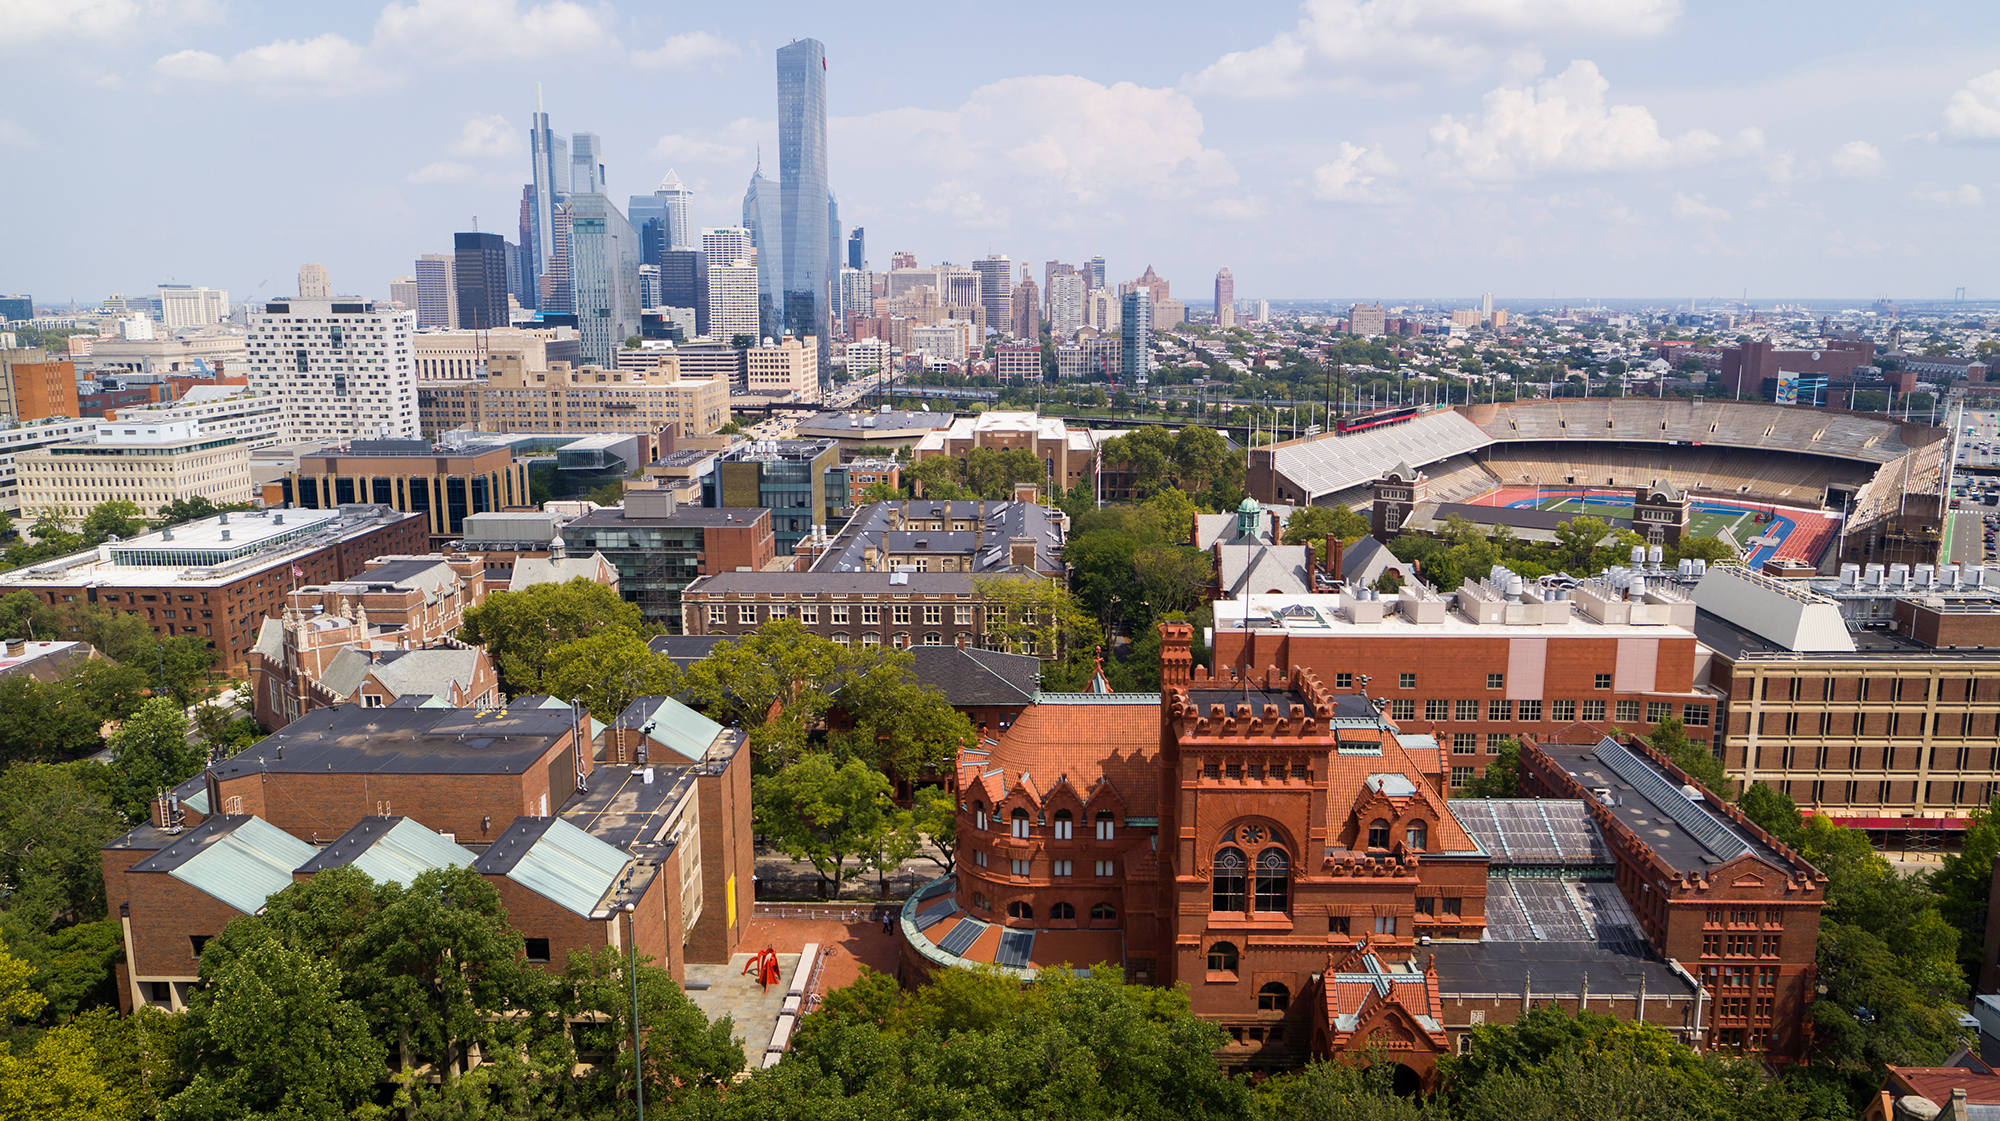 Arial view of Penn campus